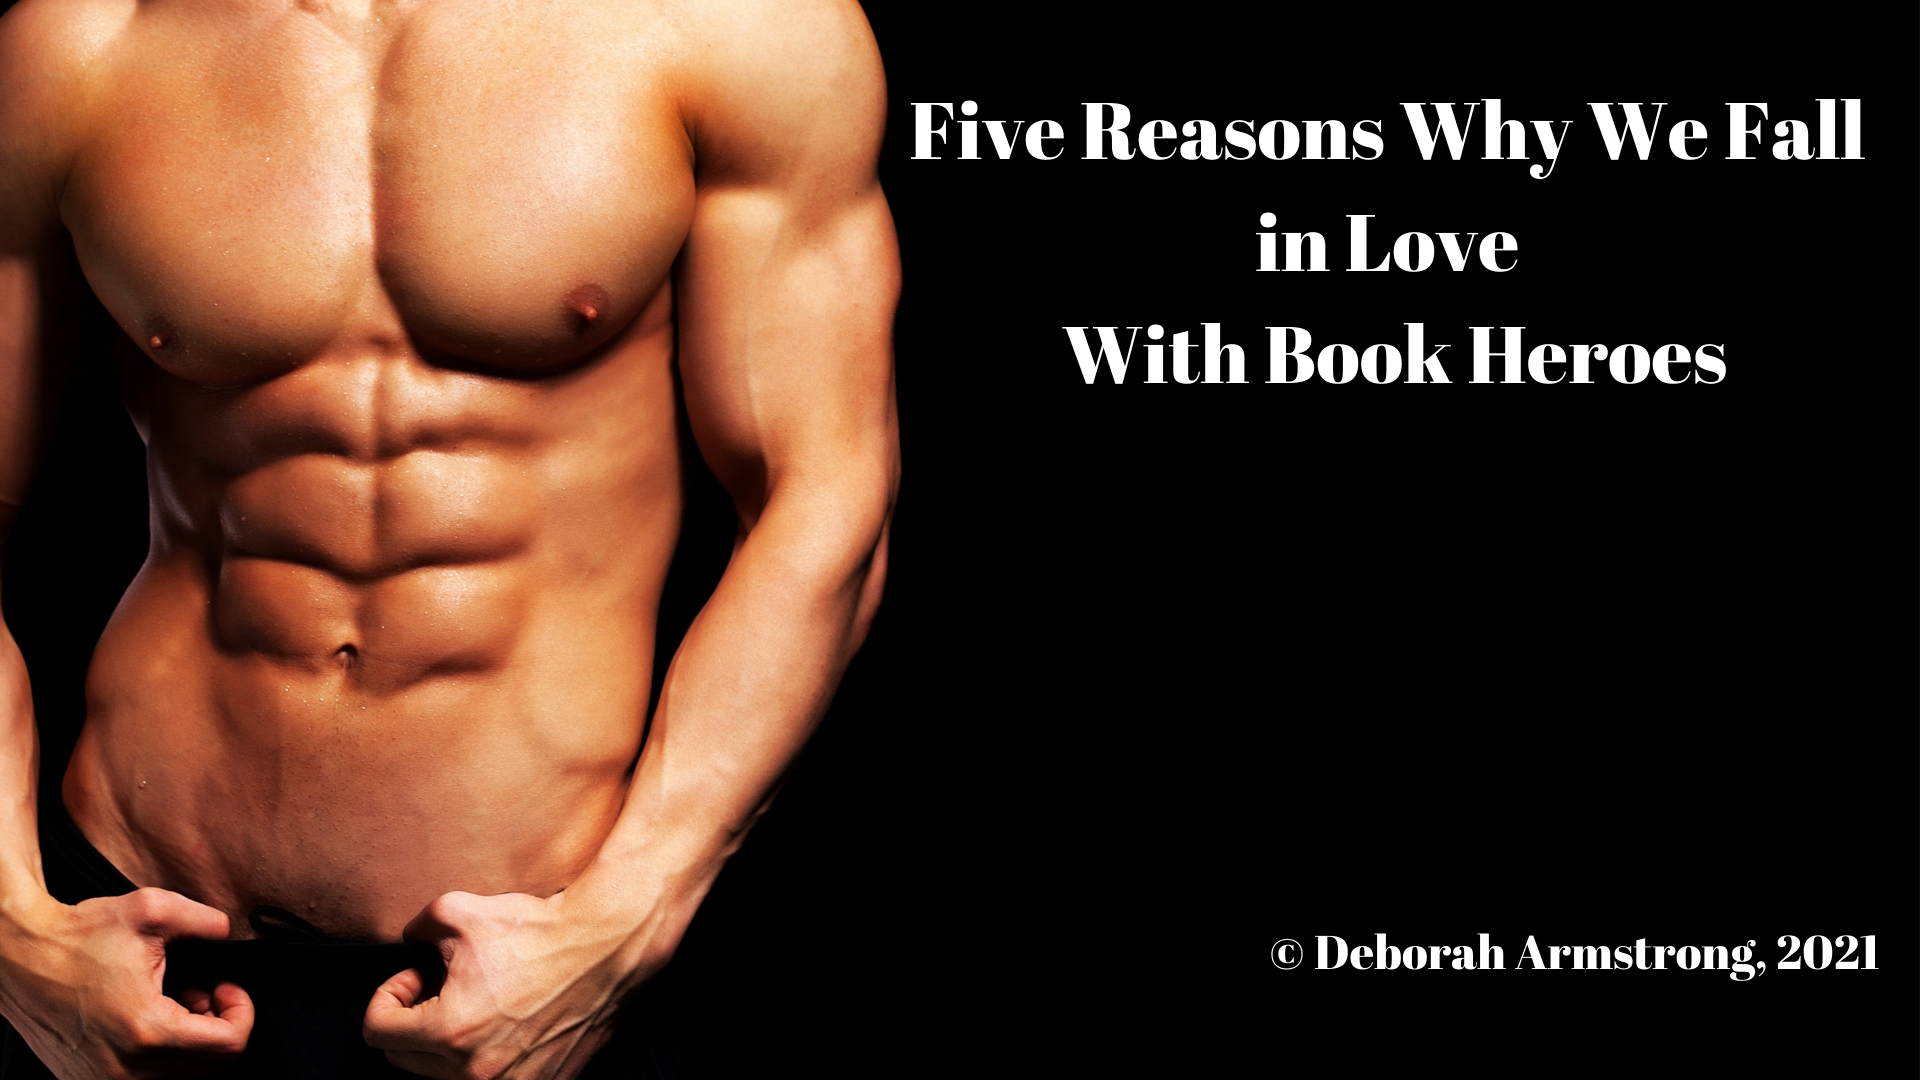 Five Reasons Why We Fall in Love with Book Heroes